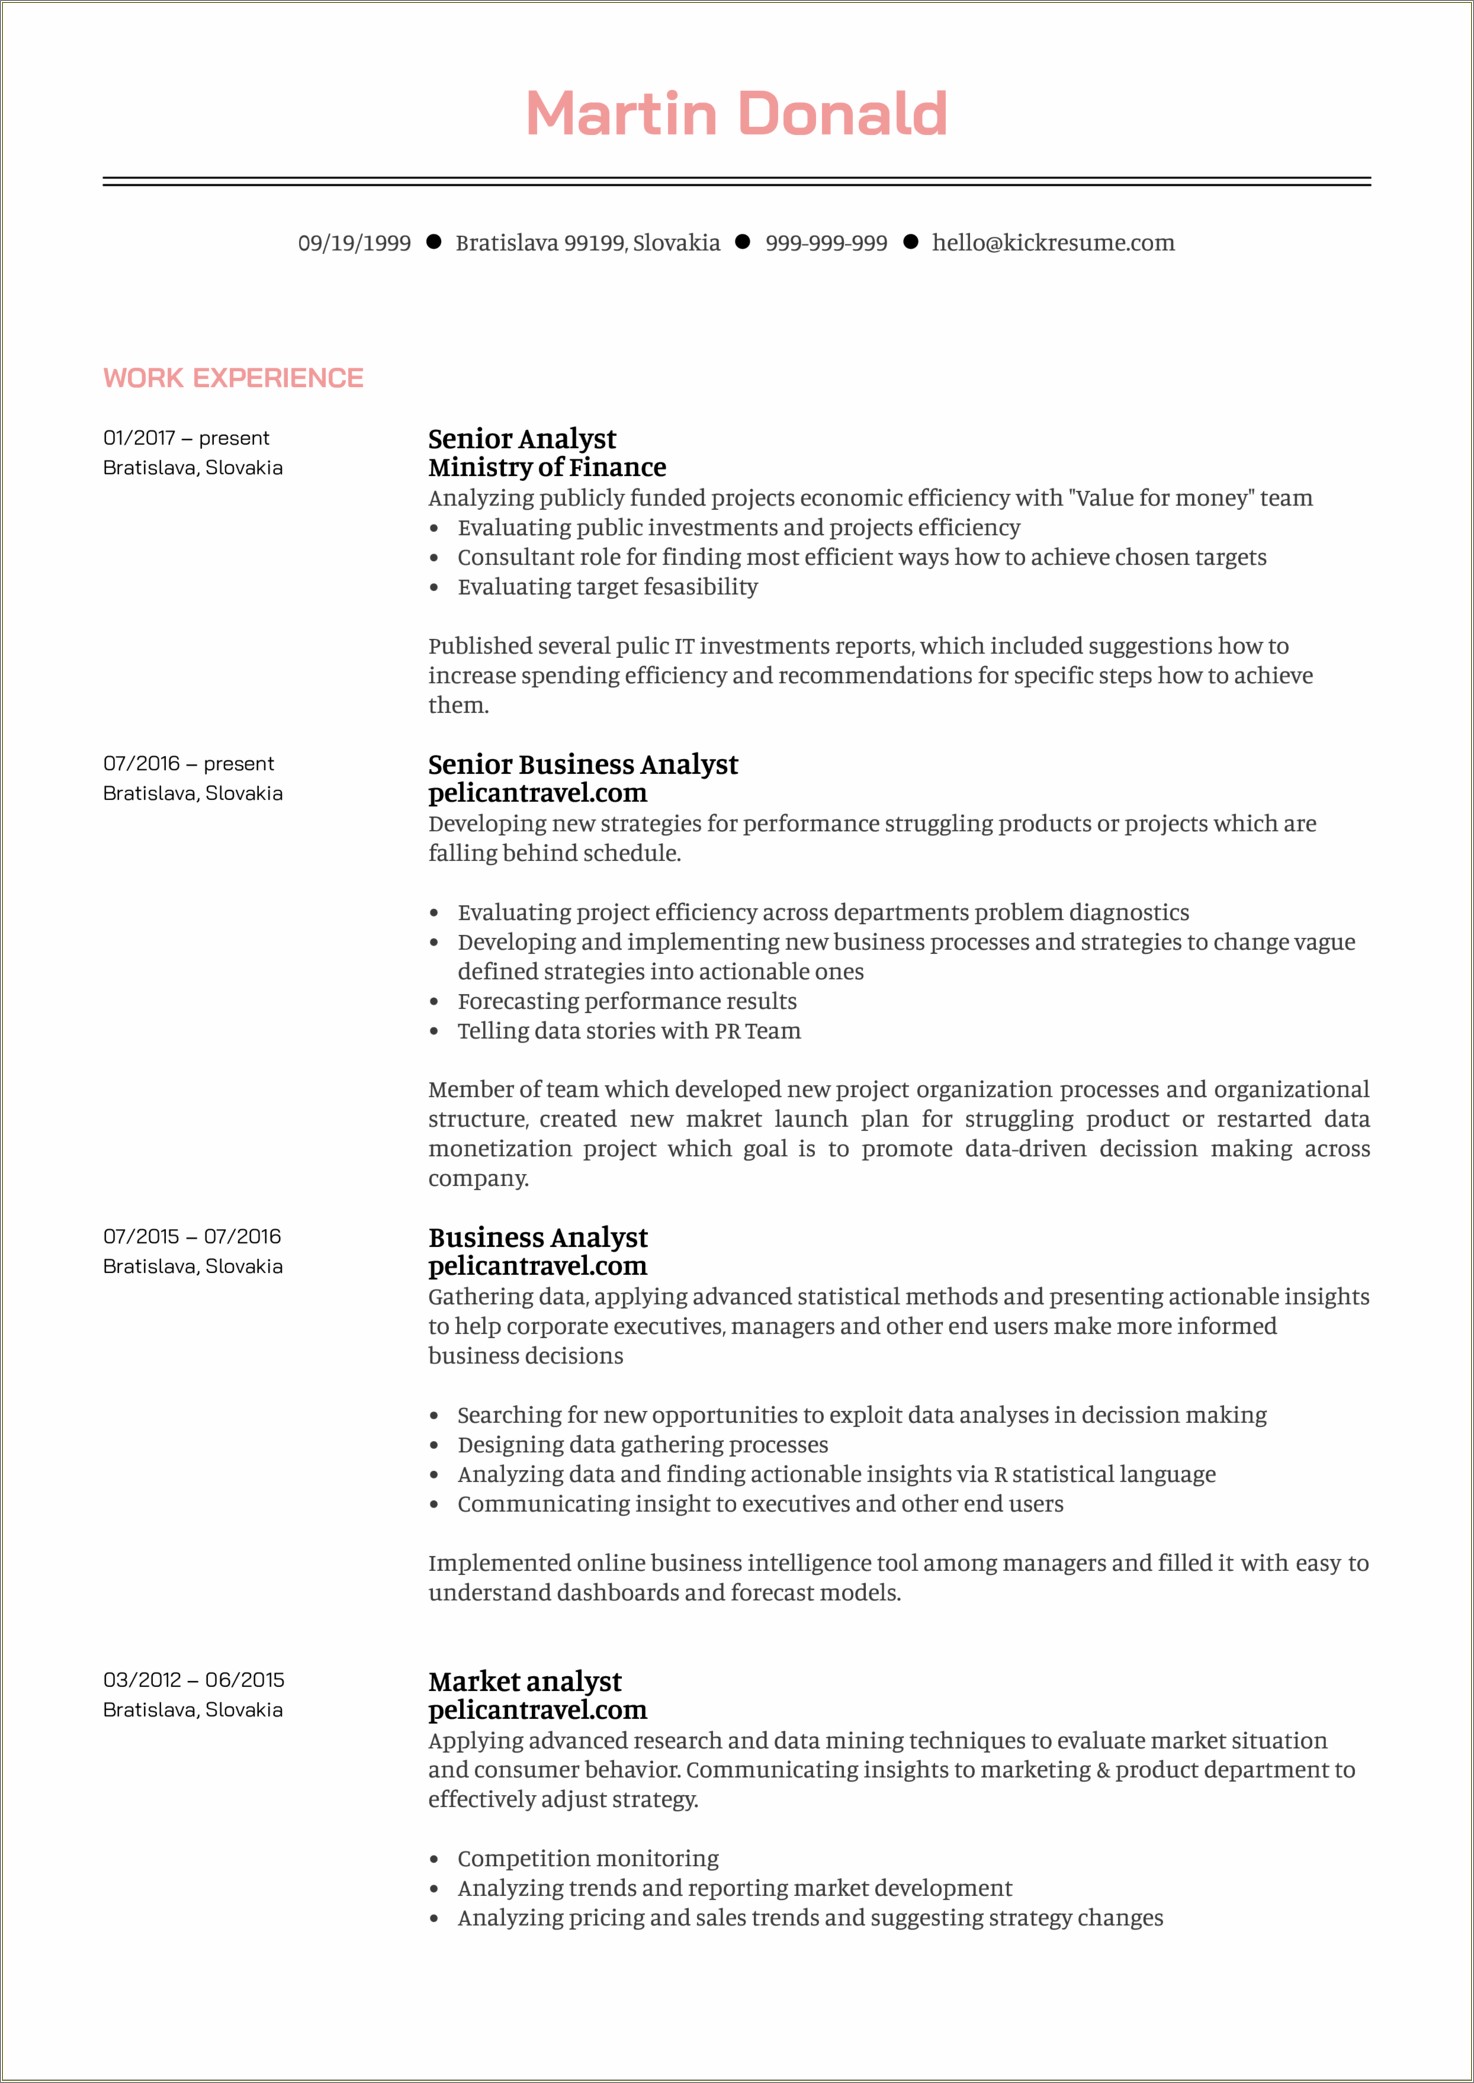 Functional Resume Sample For Business Analyst